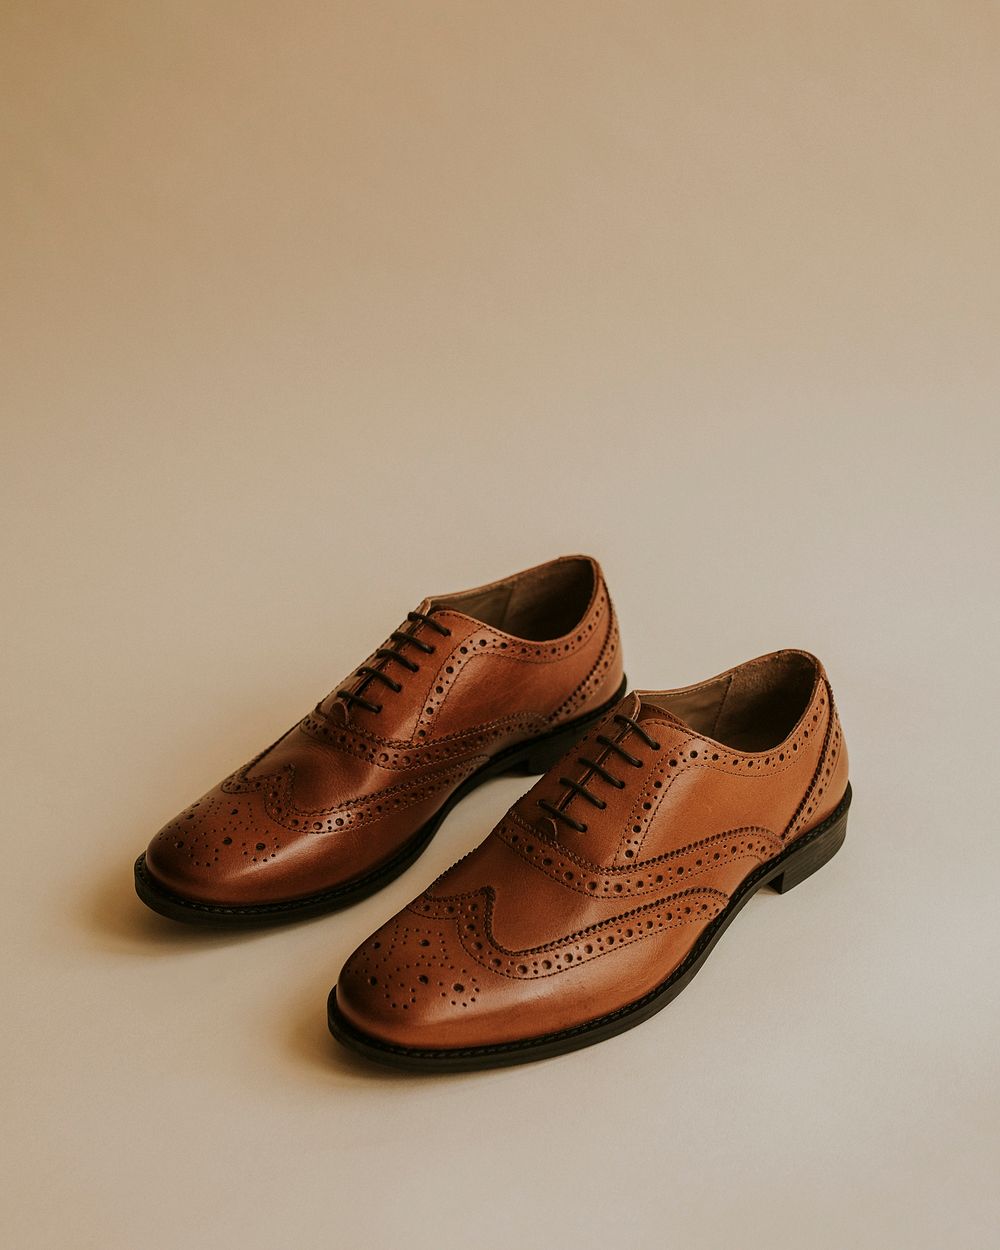 Men's brown leather derby shoes on beige